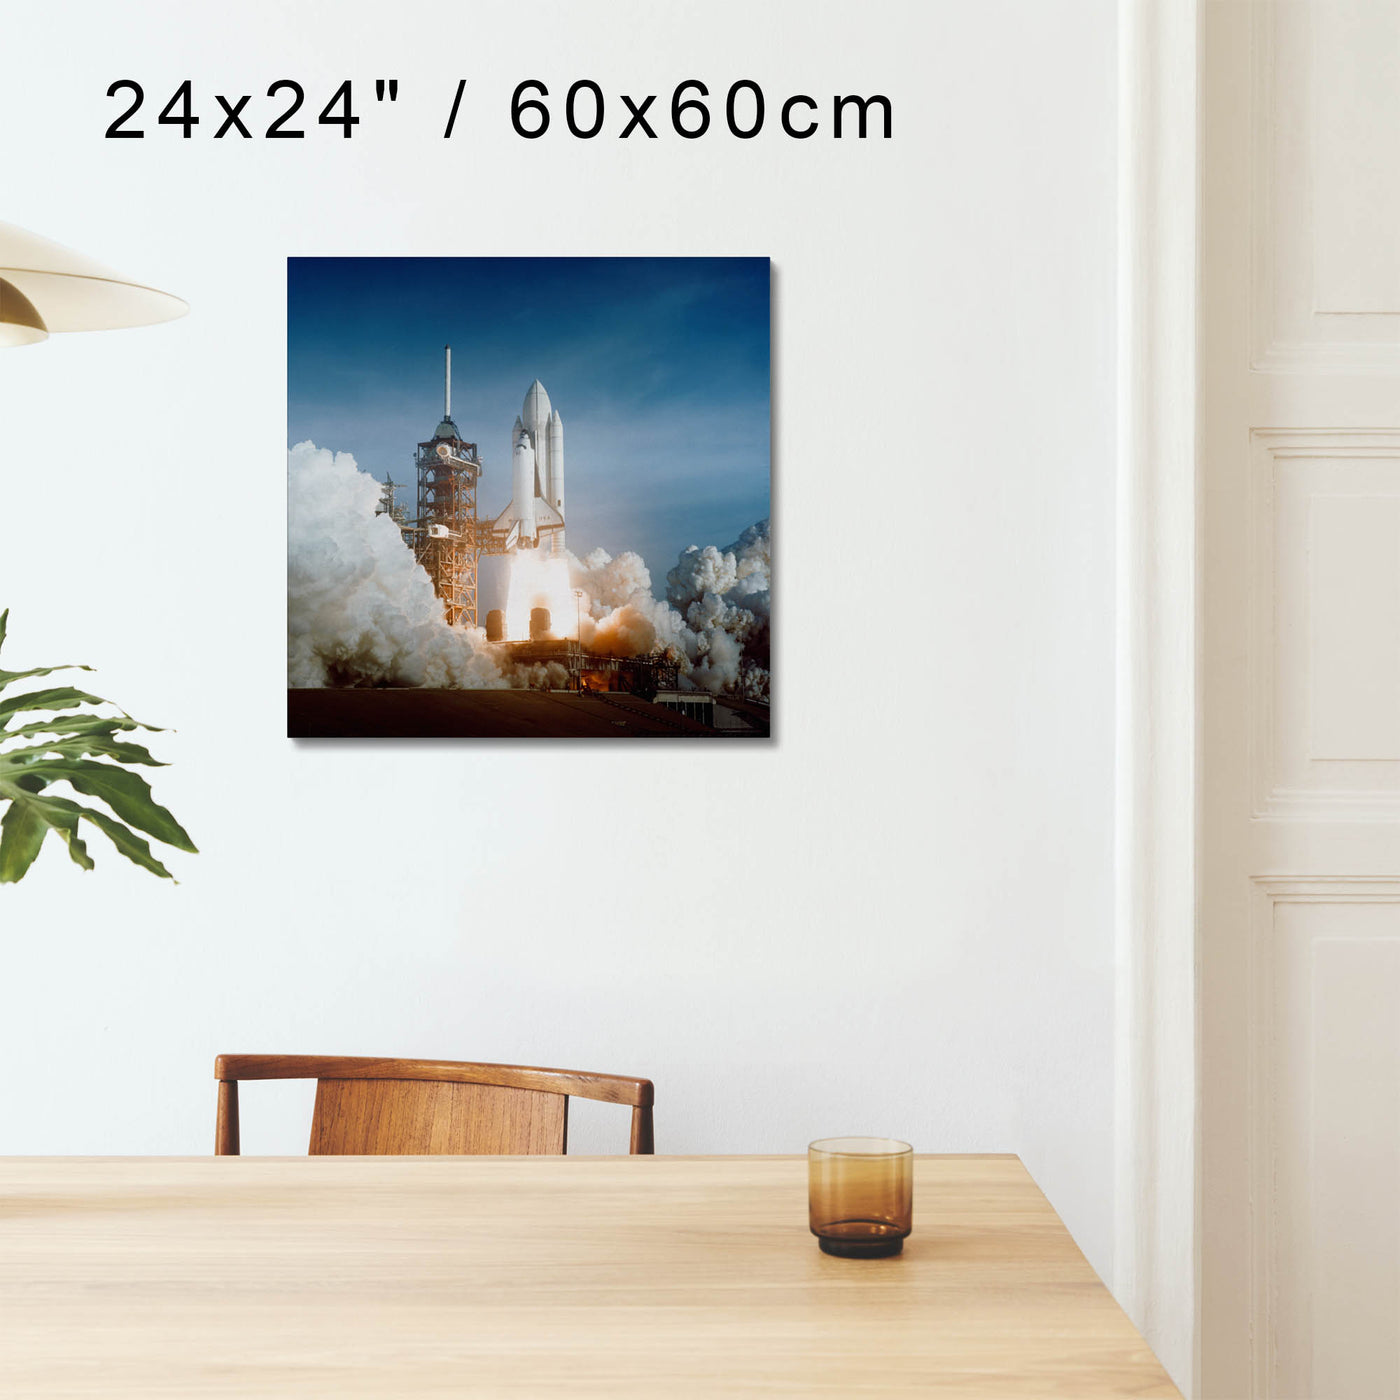 "Space Shuttle Columbia" on Aluminium, Acrylic, Canvas, Framed Prints or Print-only